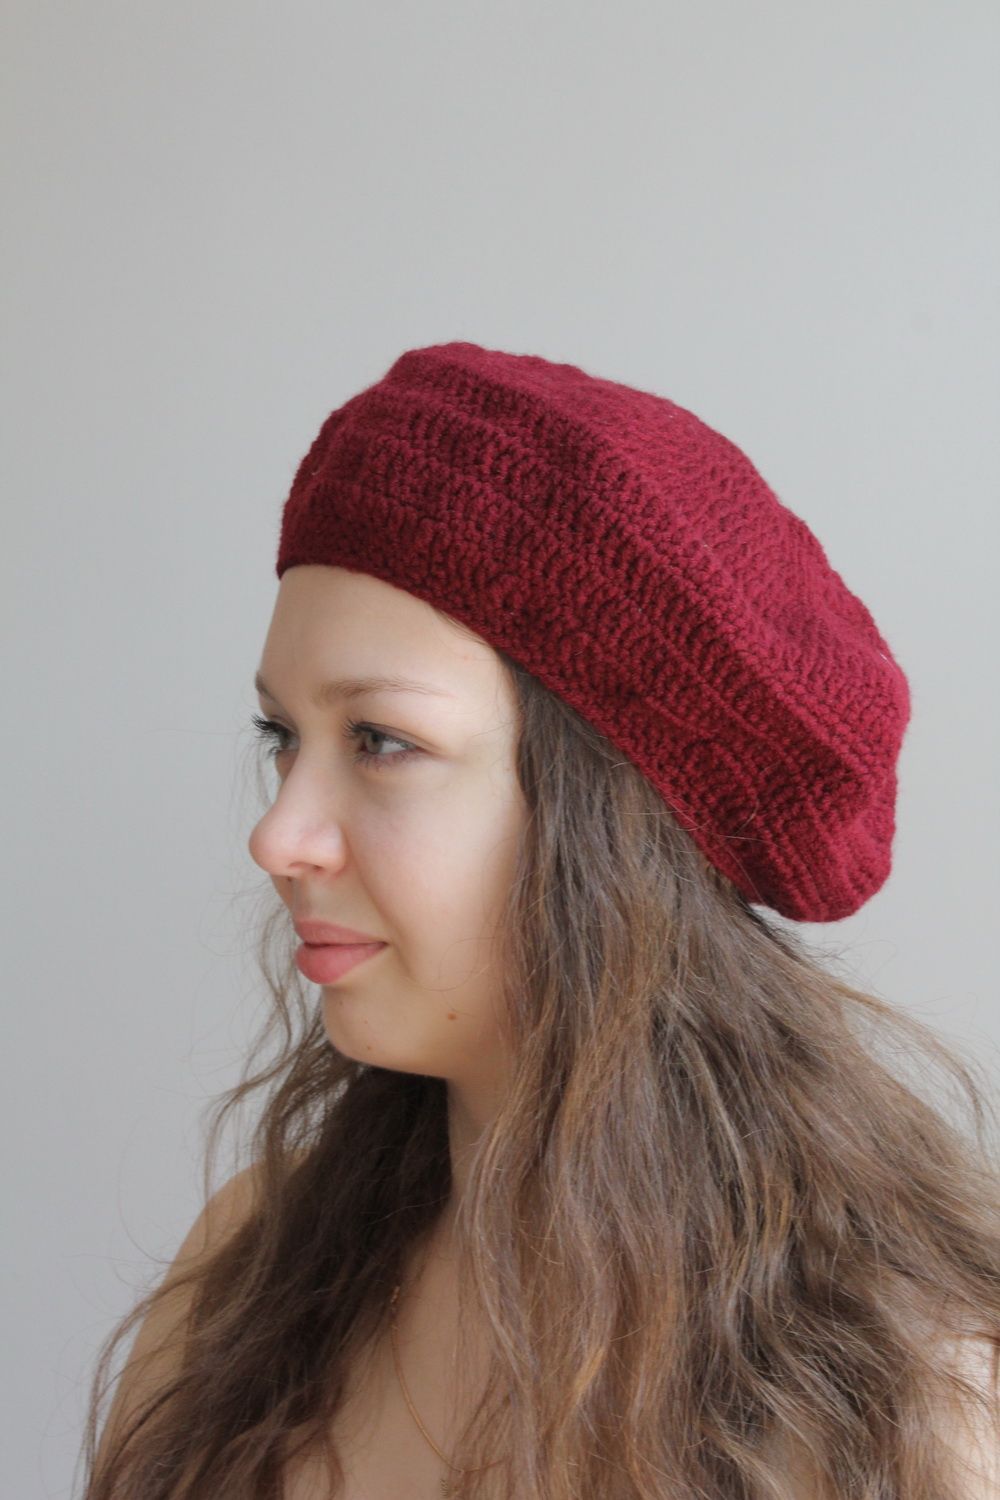 Knitted beret photo 1